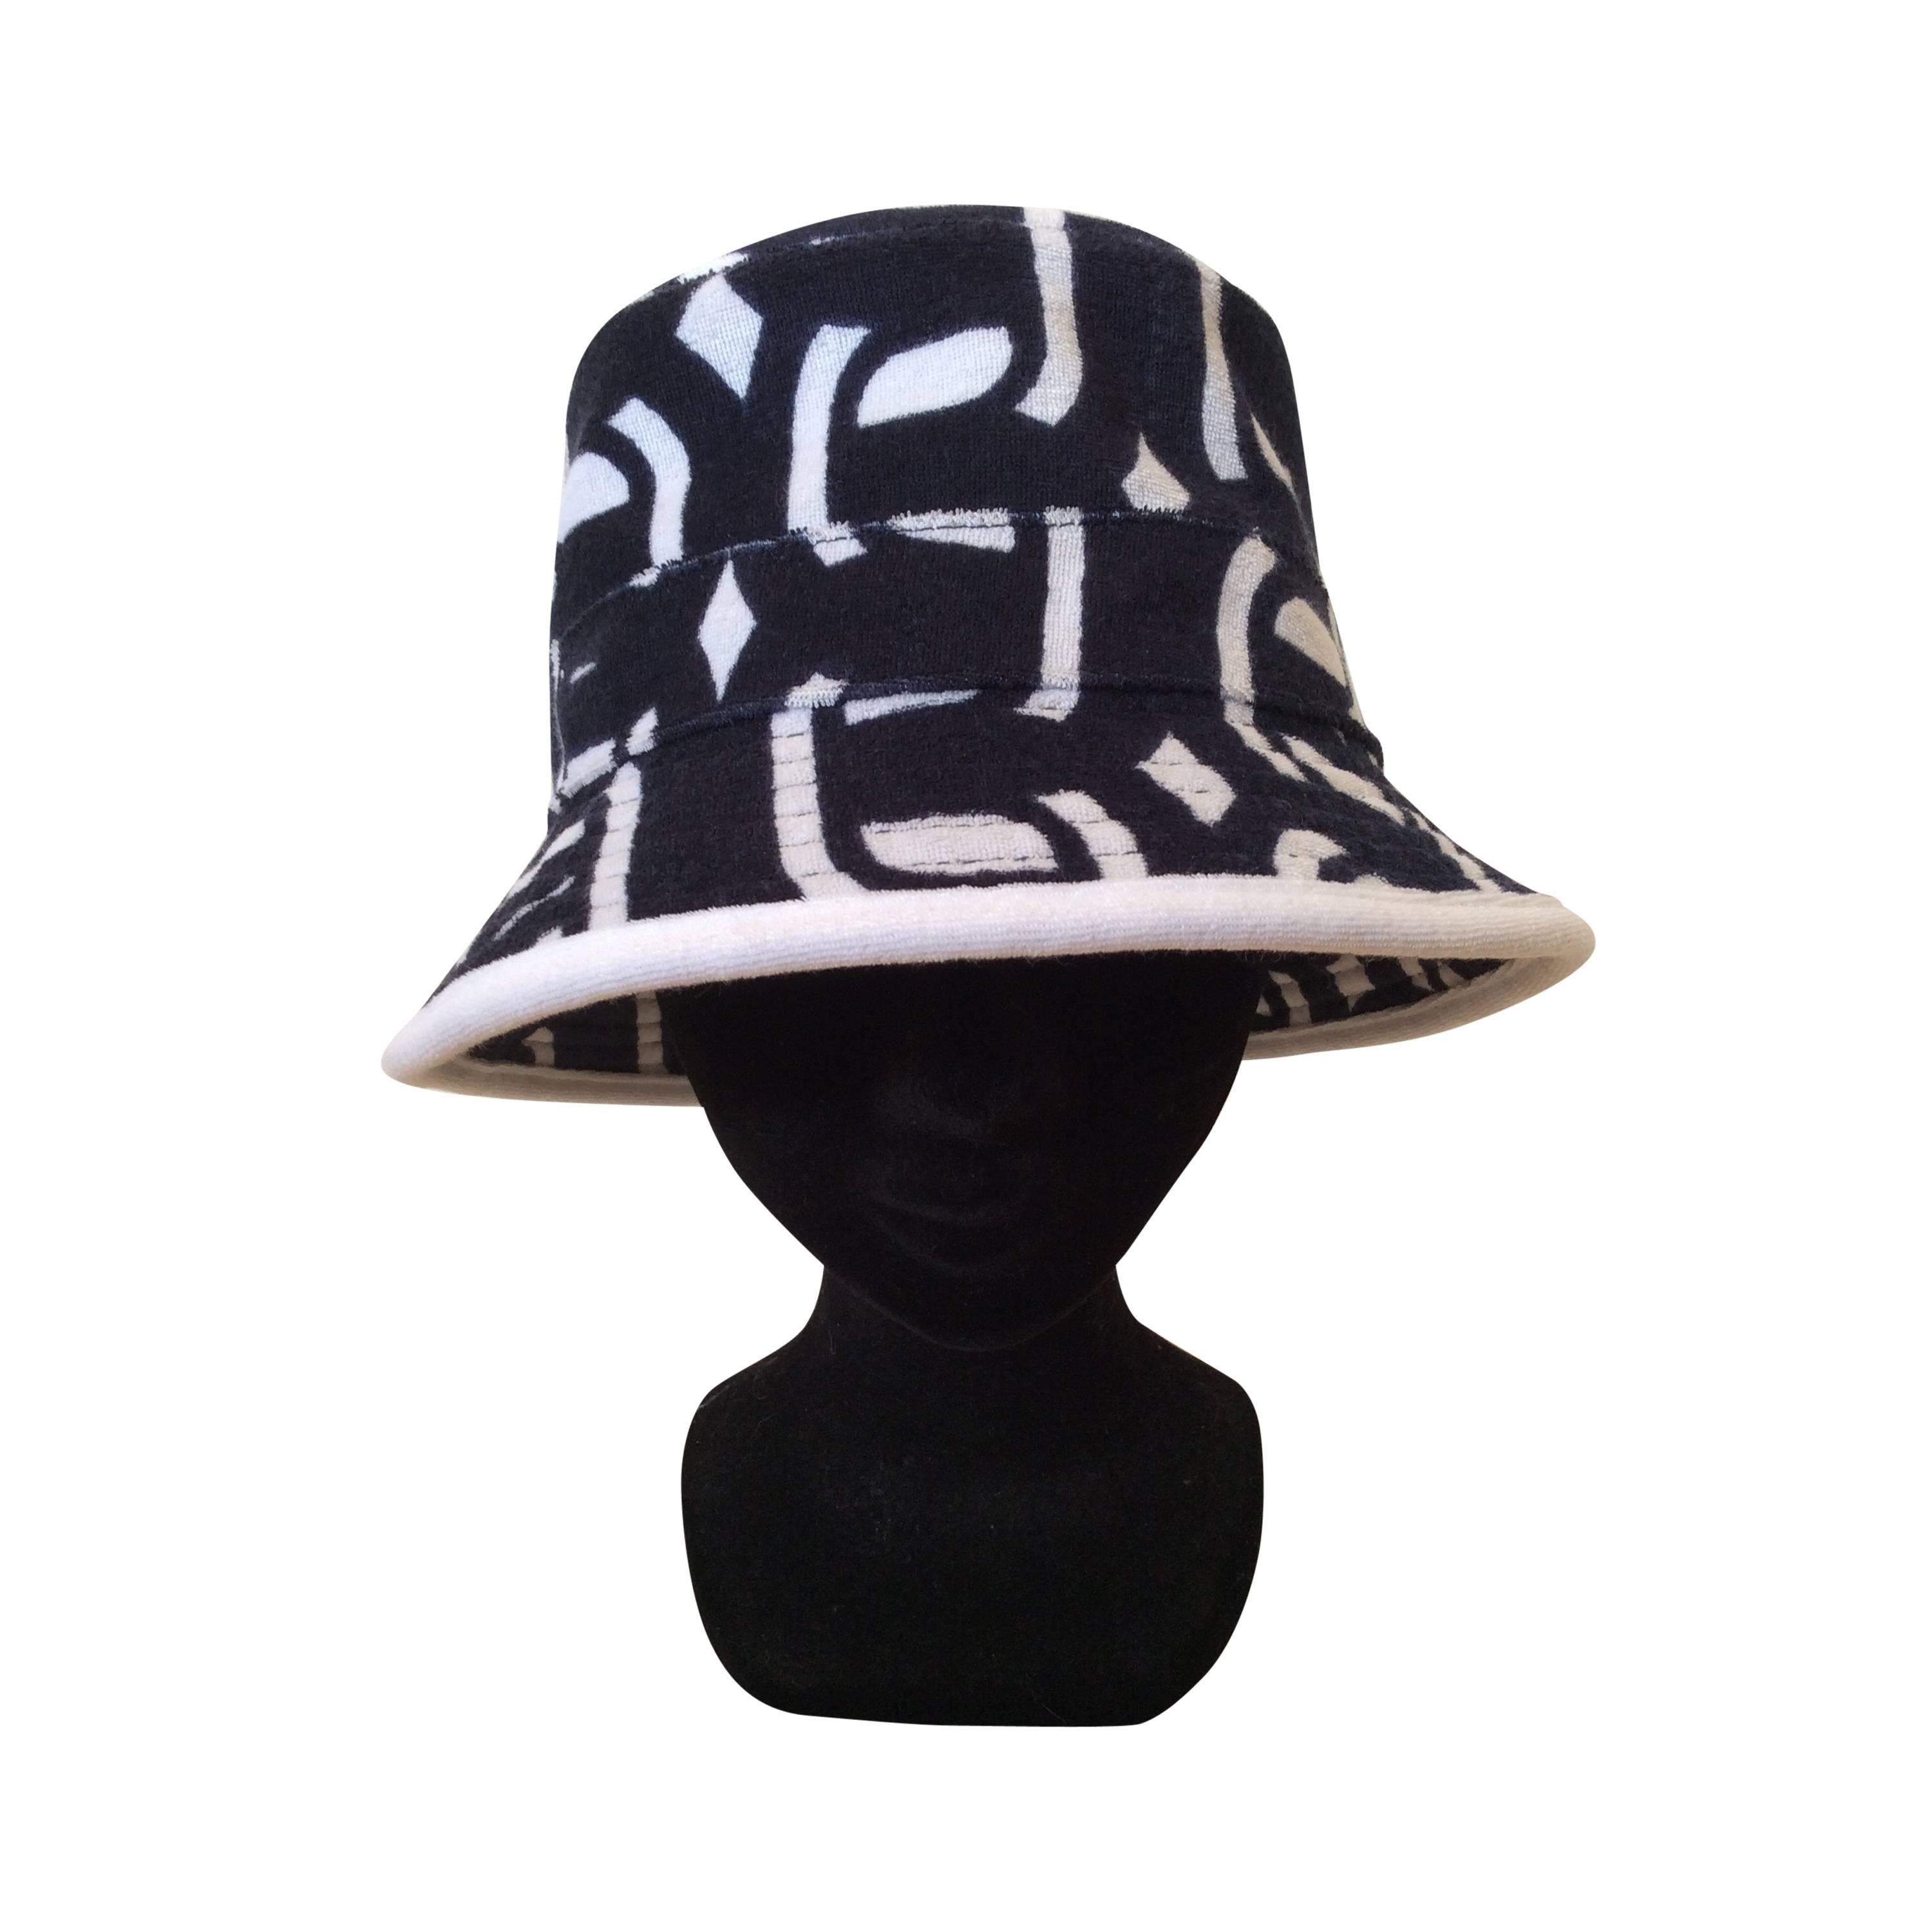 Hermes Terry Cloth Hat - Size 58